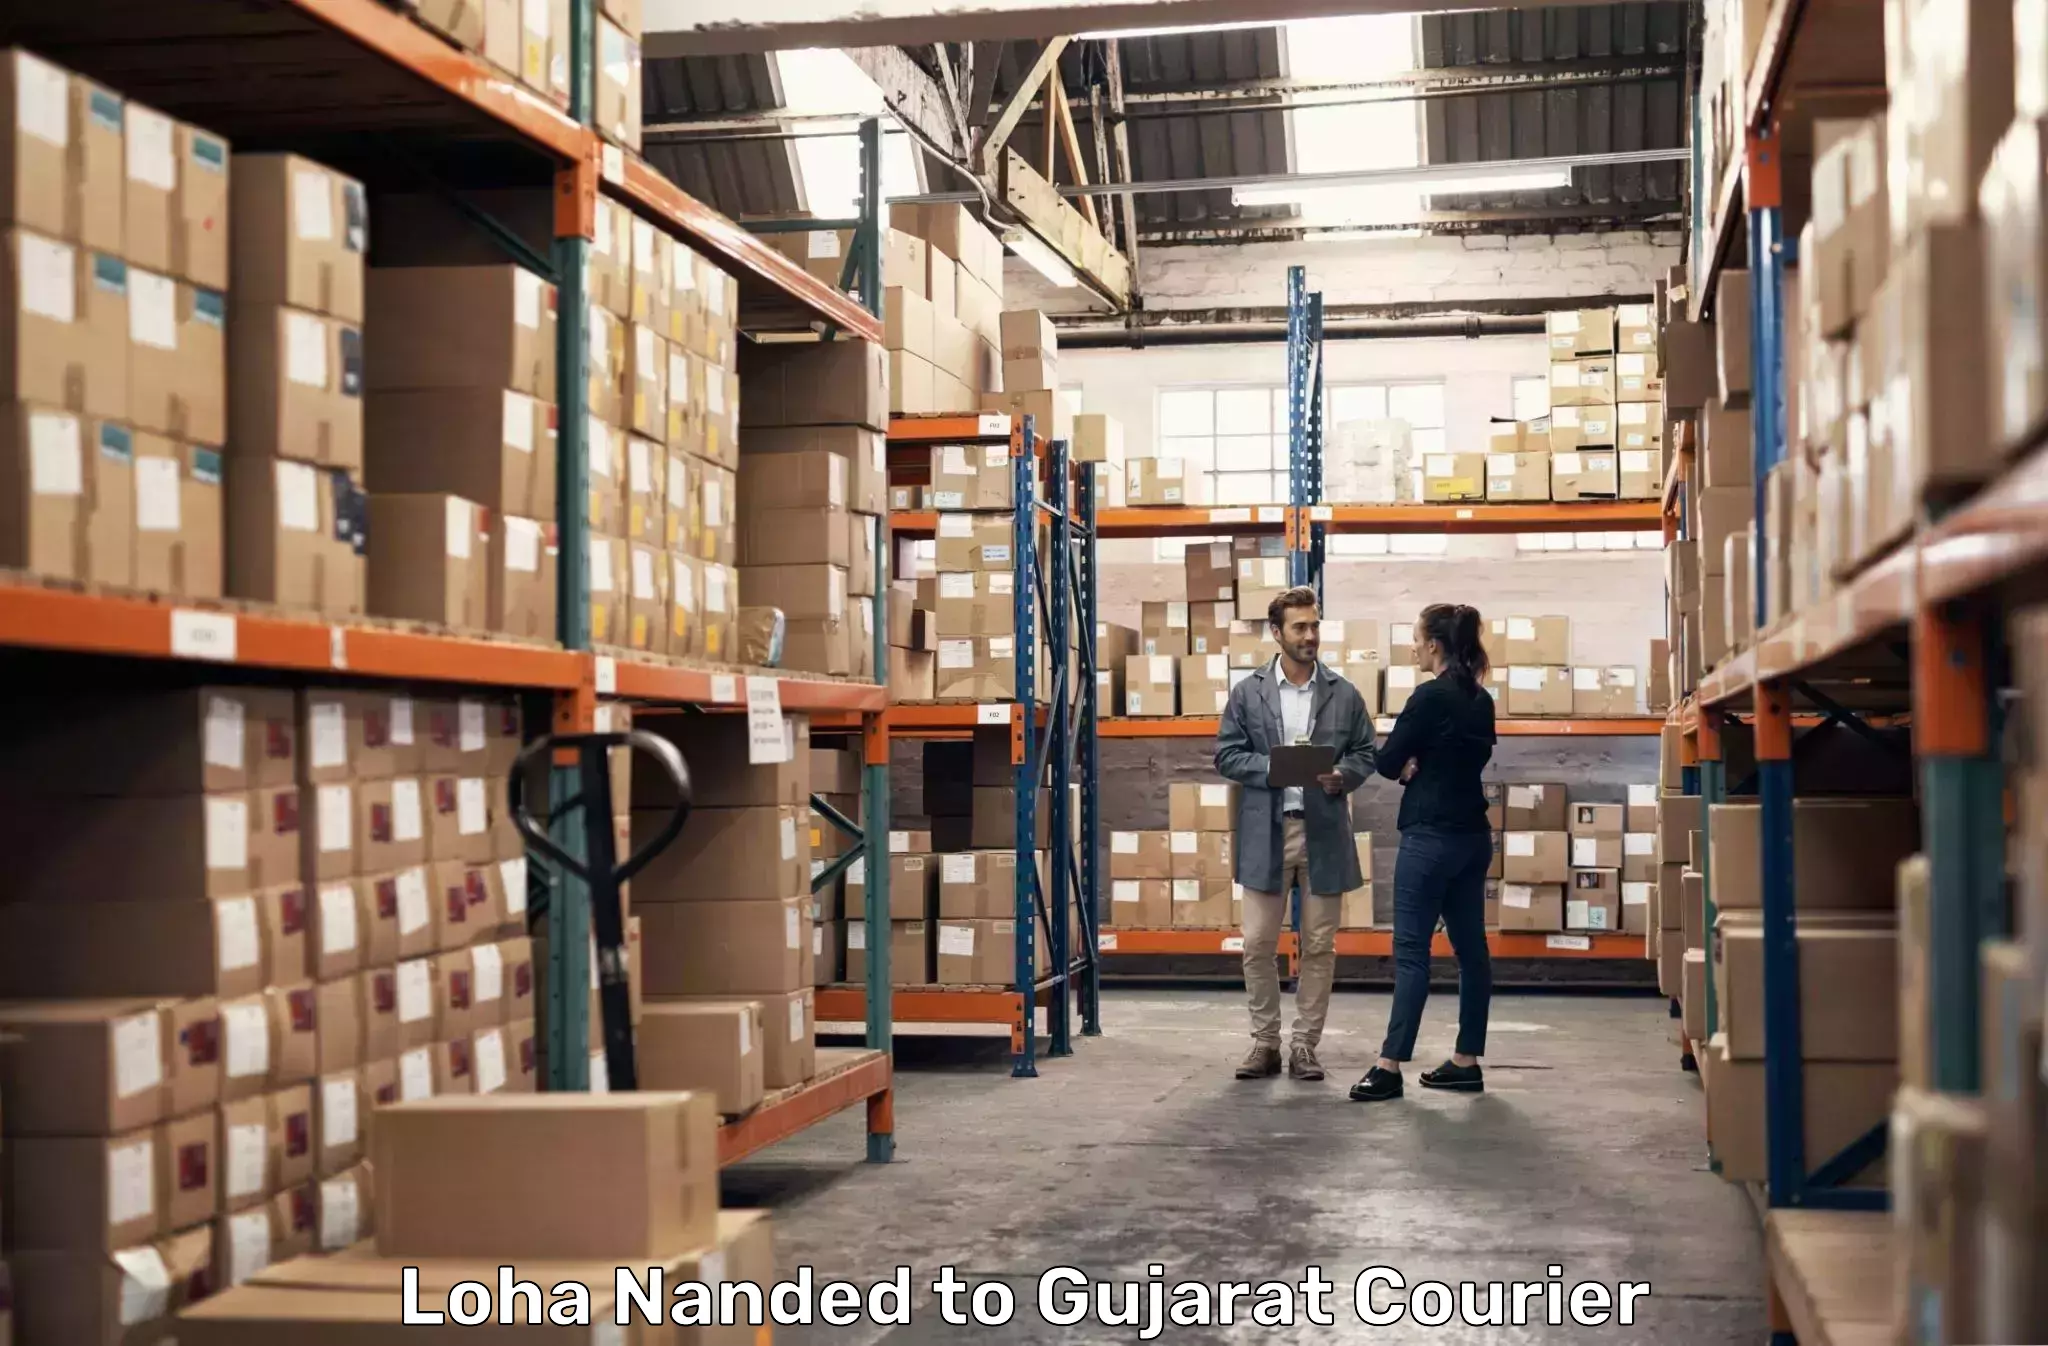 Online shipping calculator Loha Nanded to Ahmedabad